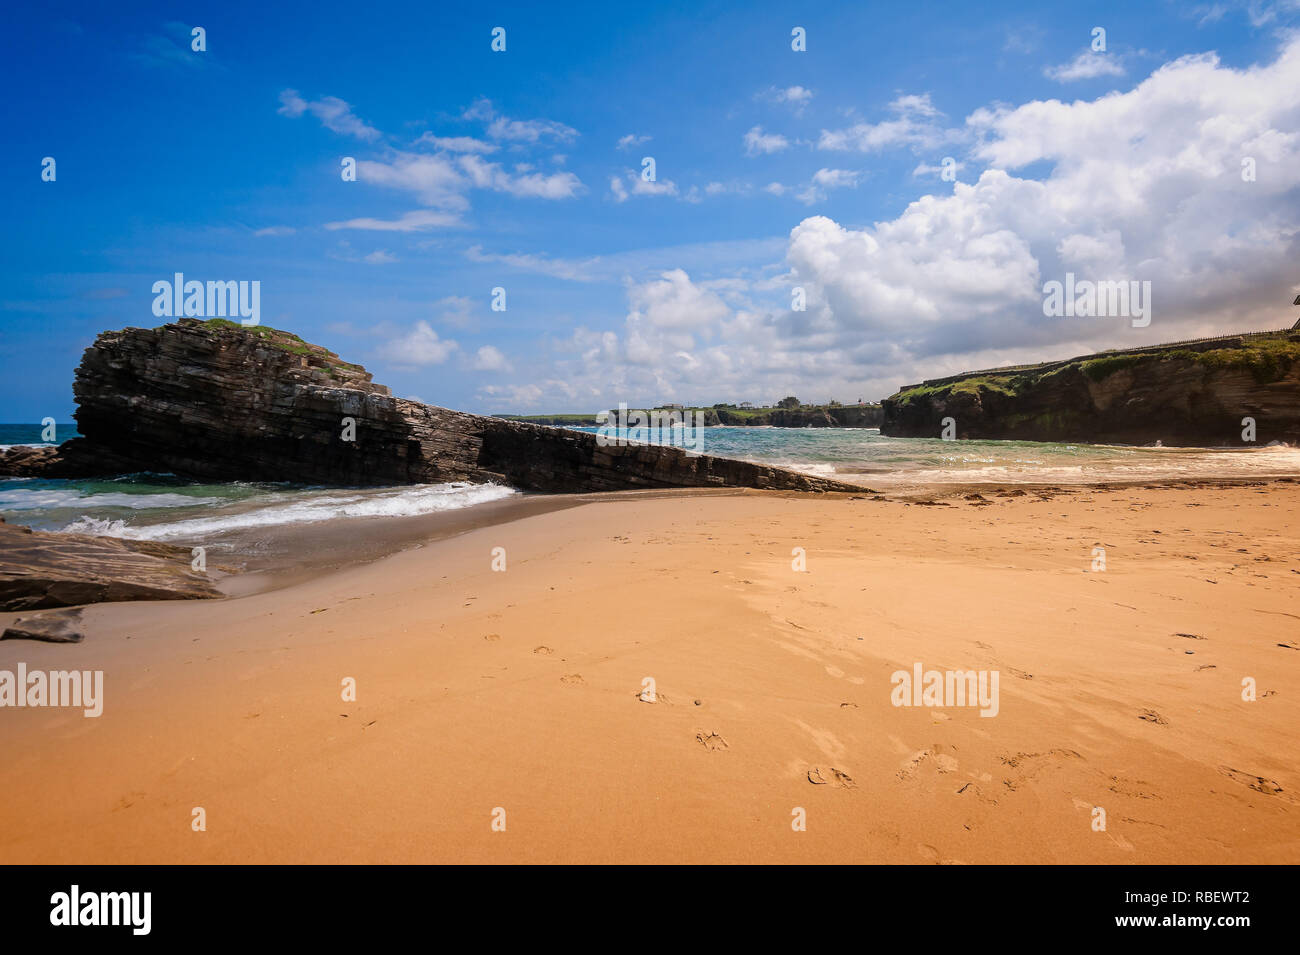 Beauty Atlantic coast with cliff,beach,ocean and sky with clouds. Galicia, Spain. Stock Photo